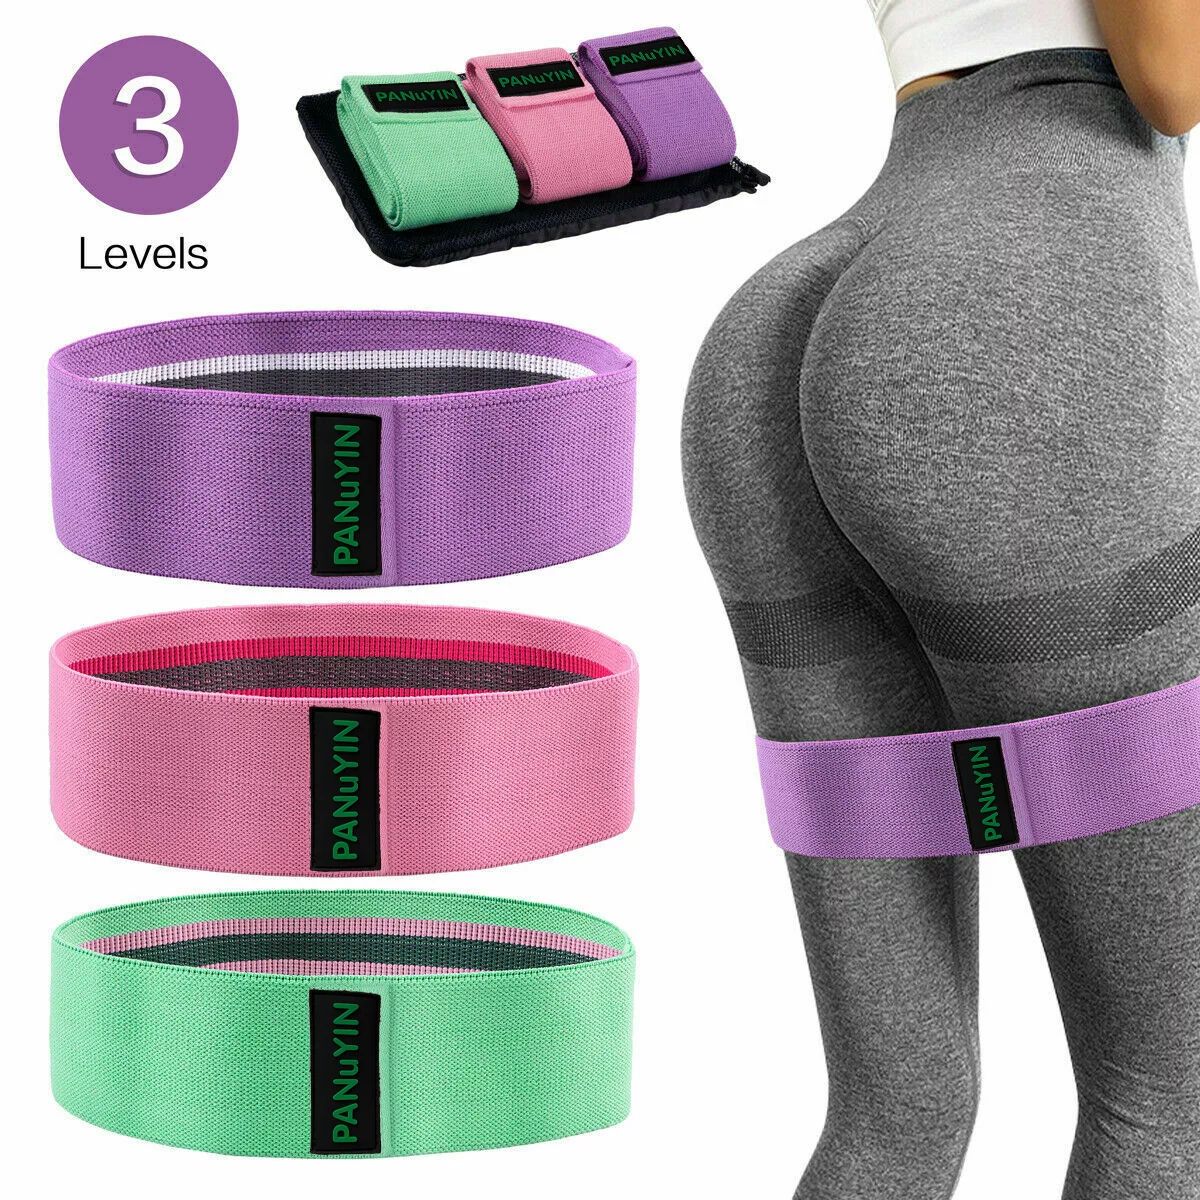 PANuYIN Crossfit Exercise Yoga Fitness Hip Leg Butt Booty Resistance 3 Bands Loop Workout Set | Walmart (US)